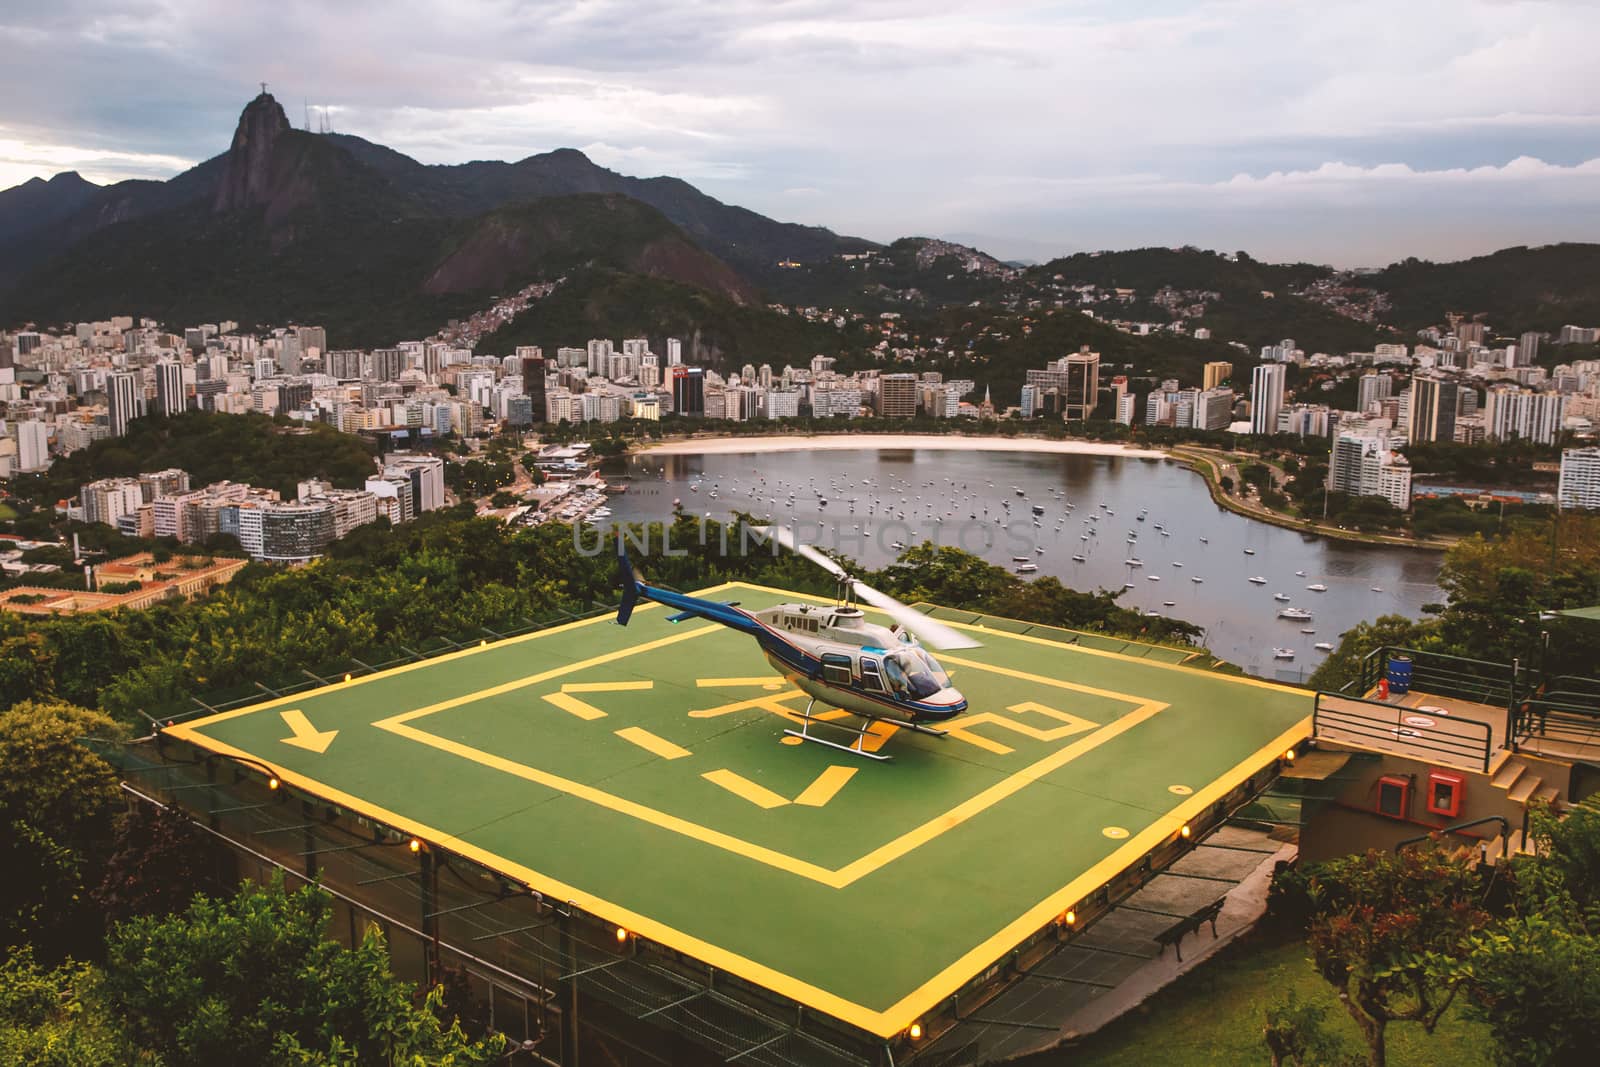 Helicopter at helipad in Rio de Janeiro, Brazil